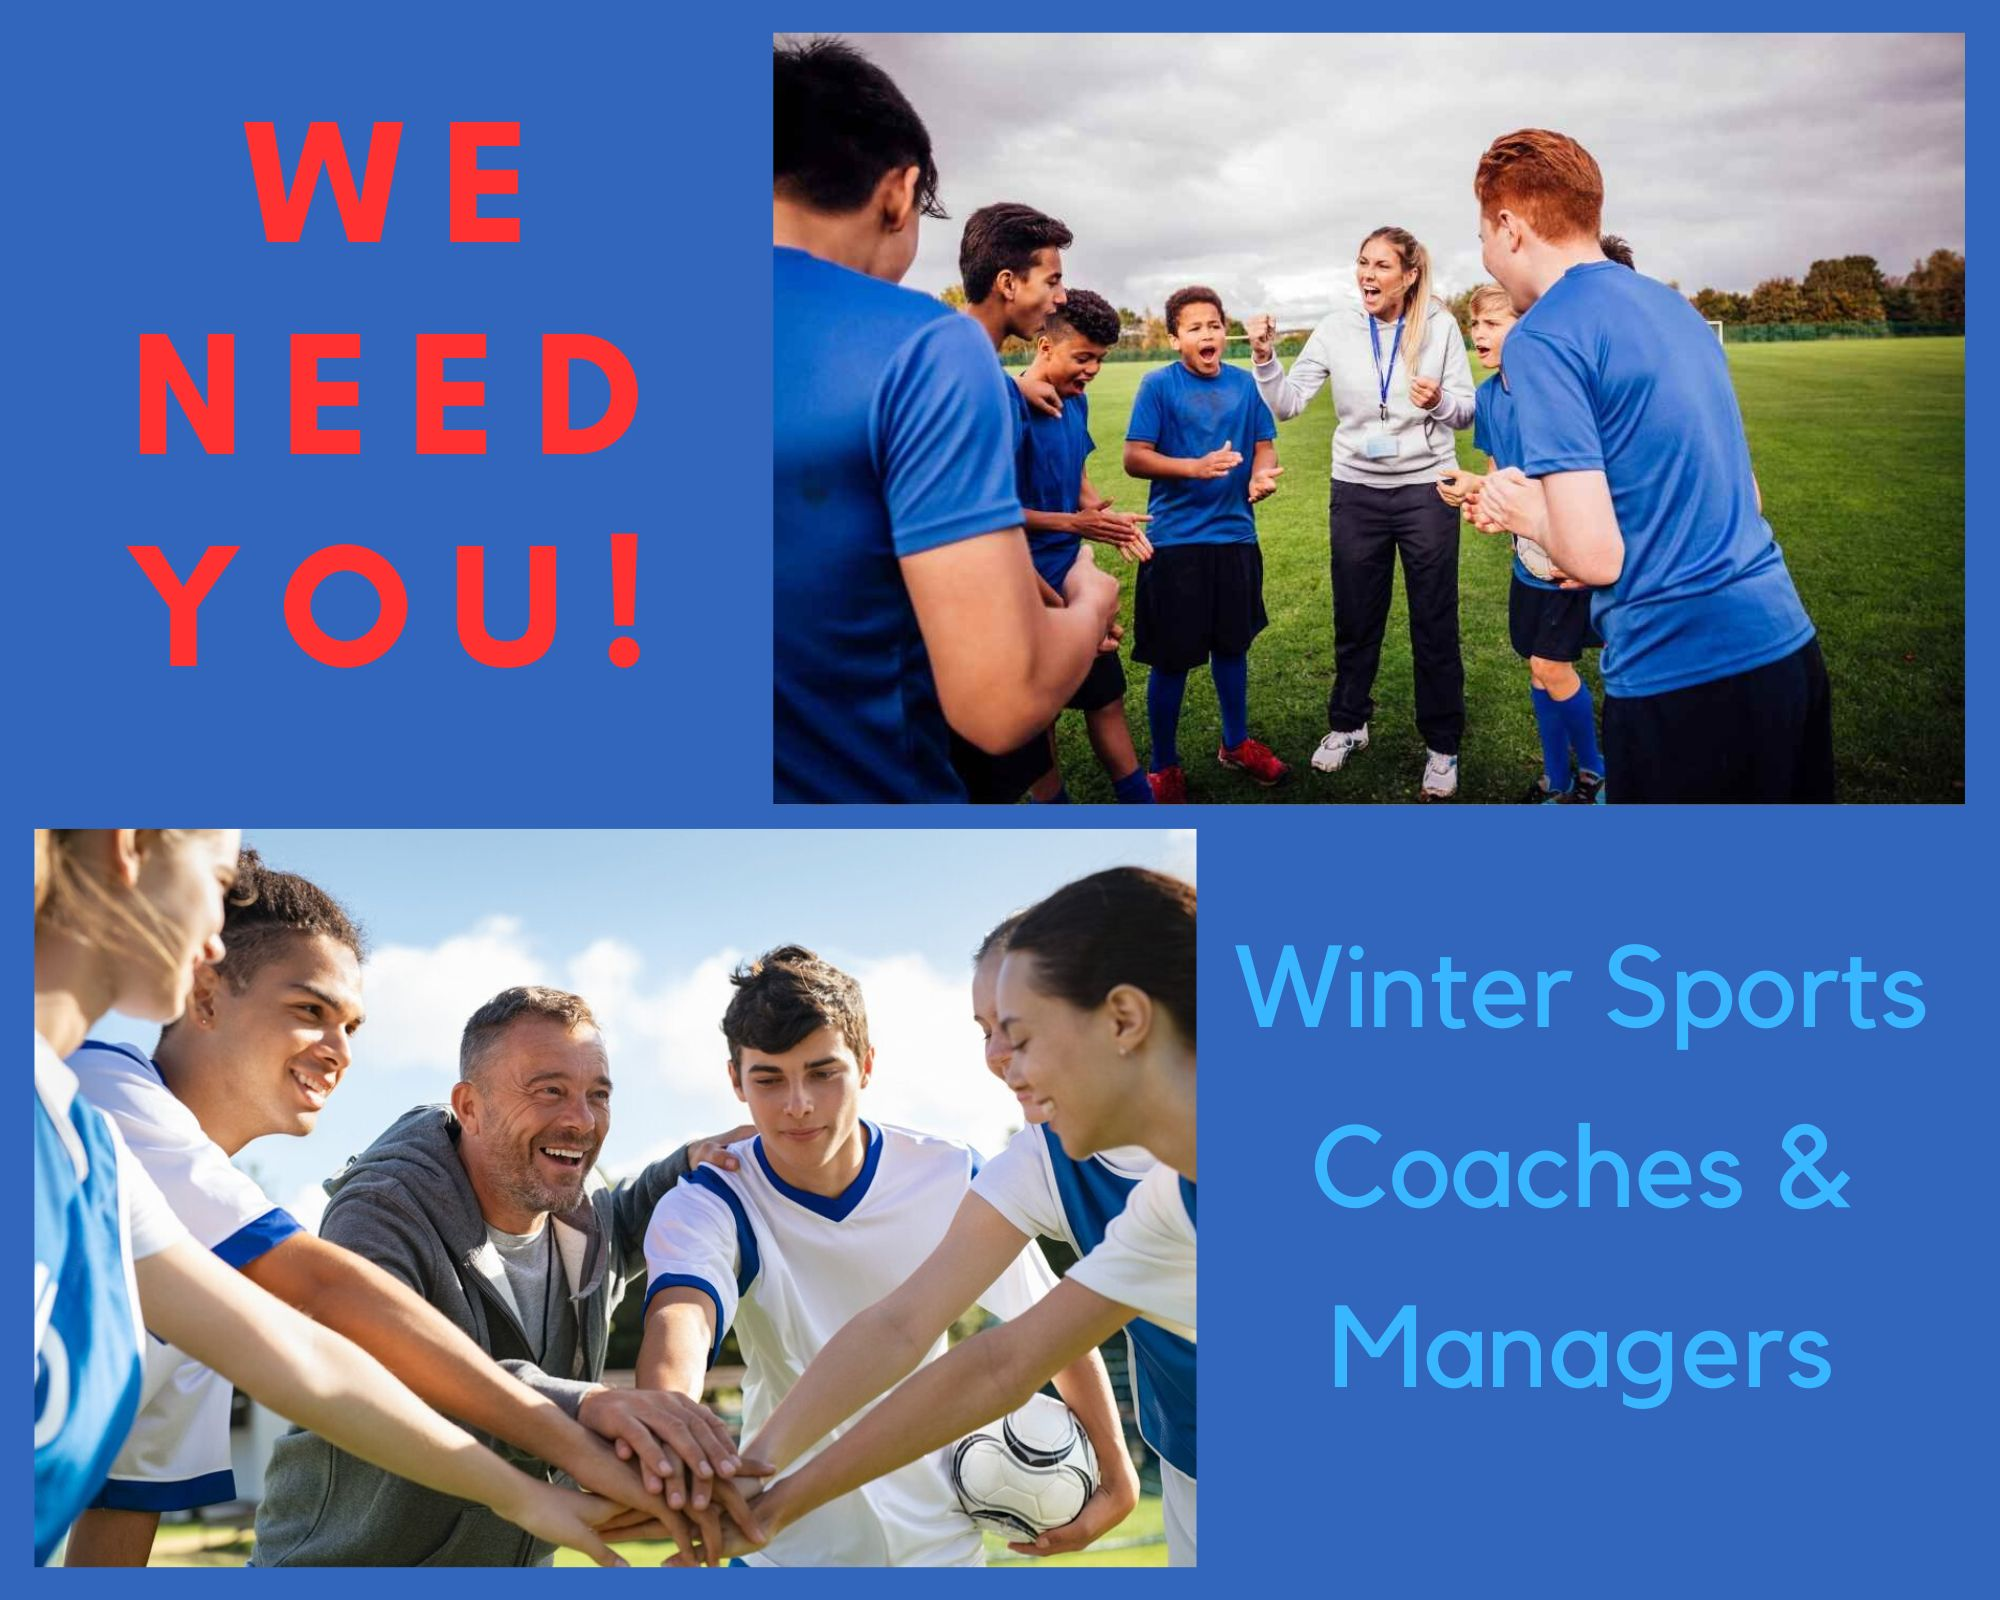 Winter Sports Coaches/Managers Needed